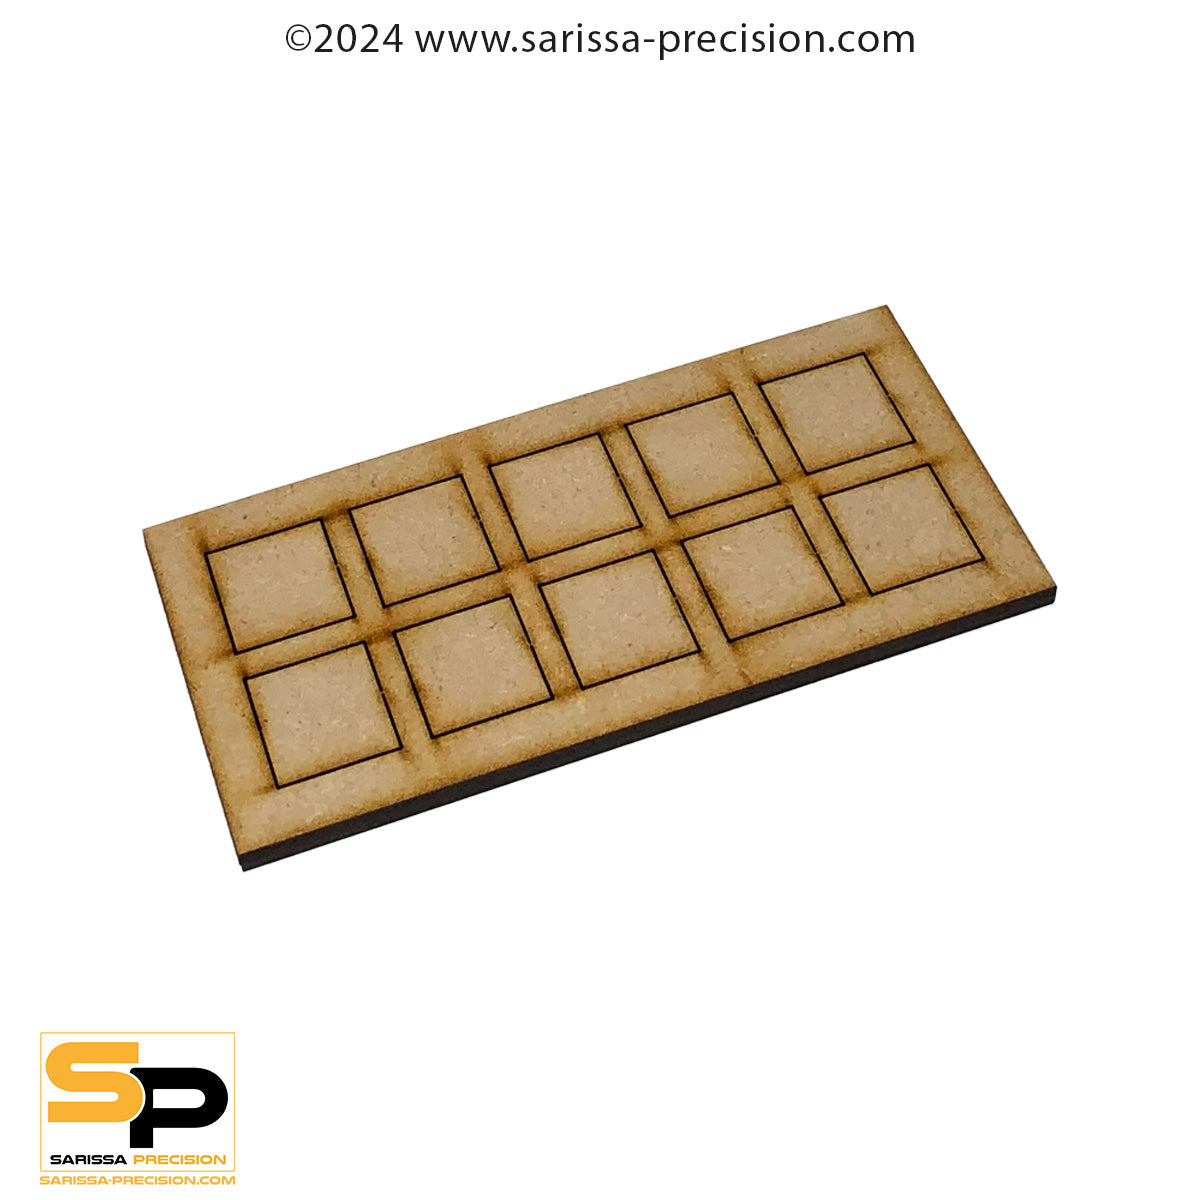 2x1 25x25mm Conversion Tray for 20x20mm bases